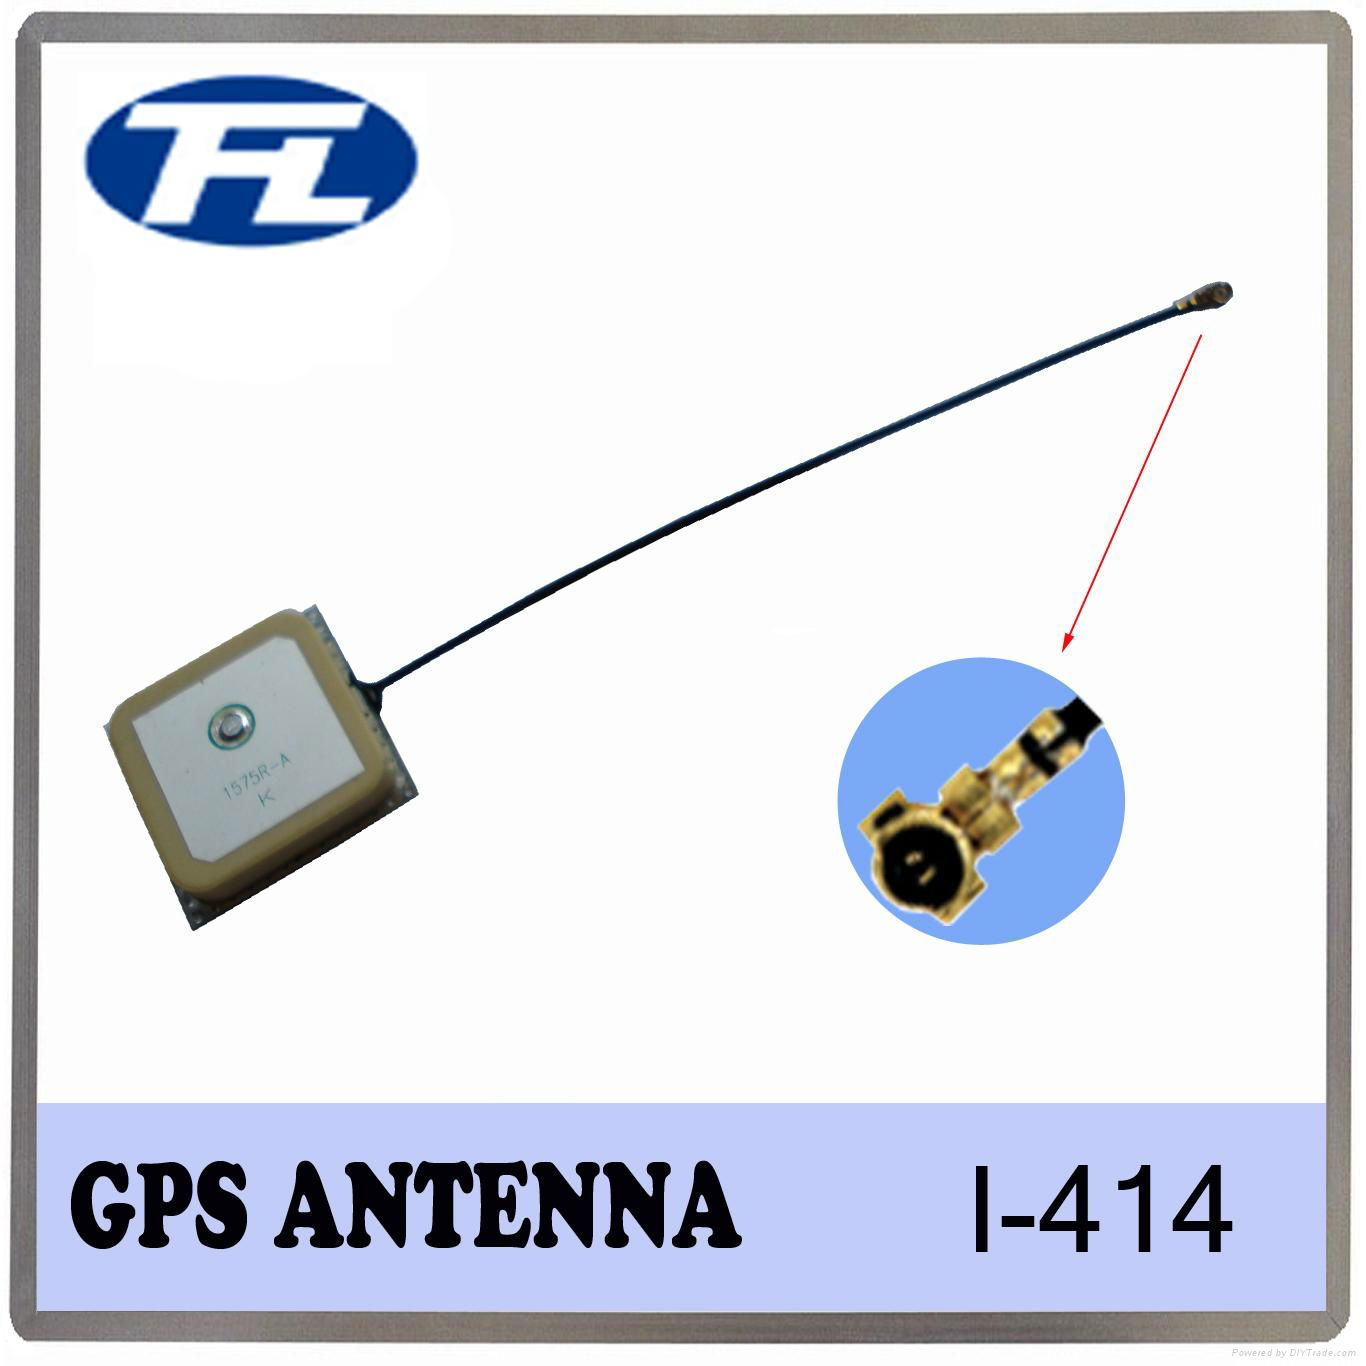 Embedded GPS Dielectric Antenna 4